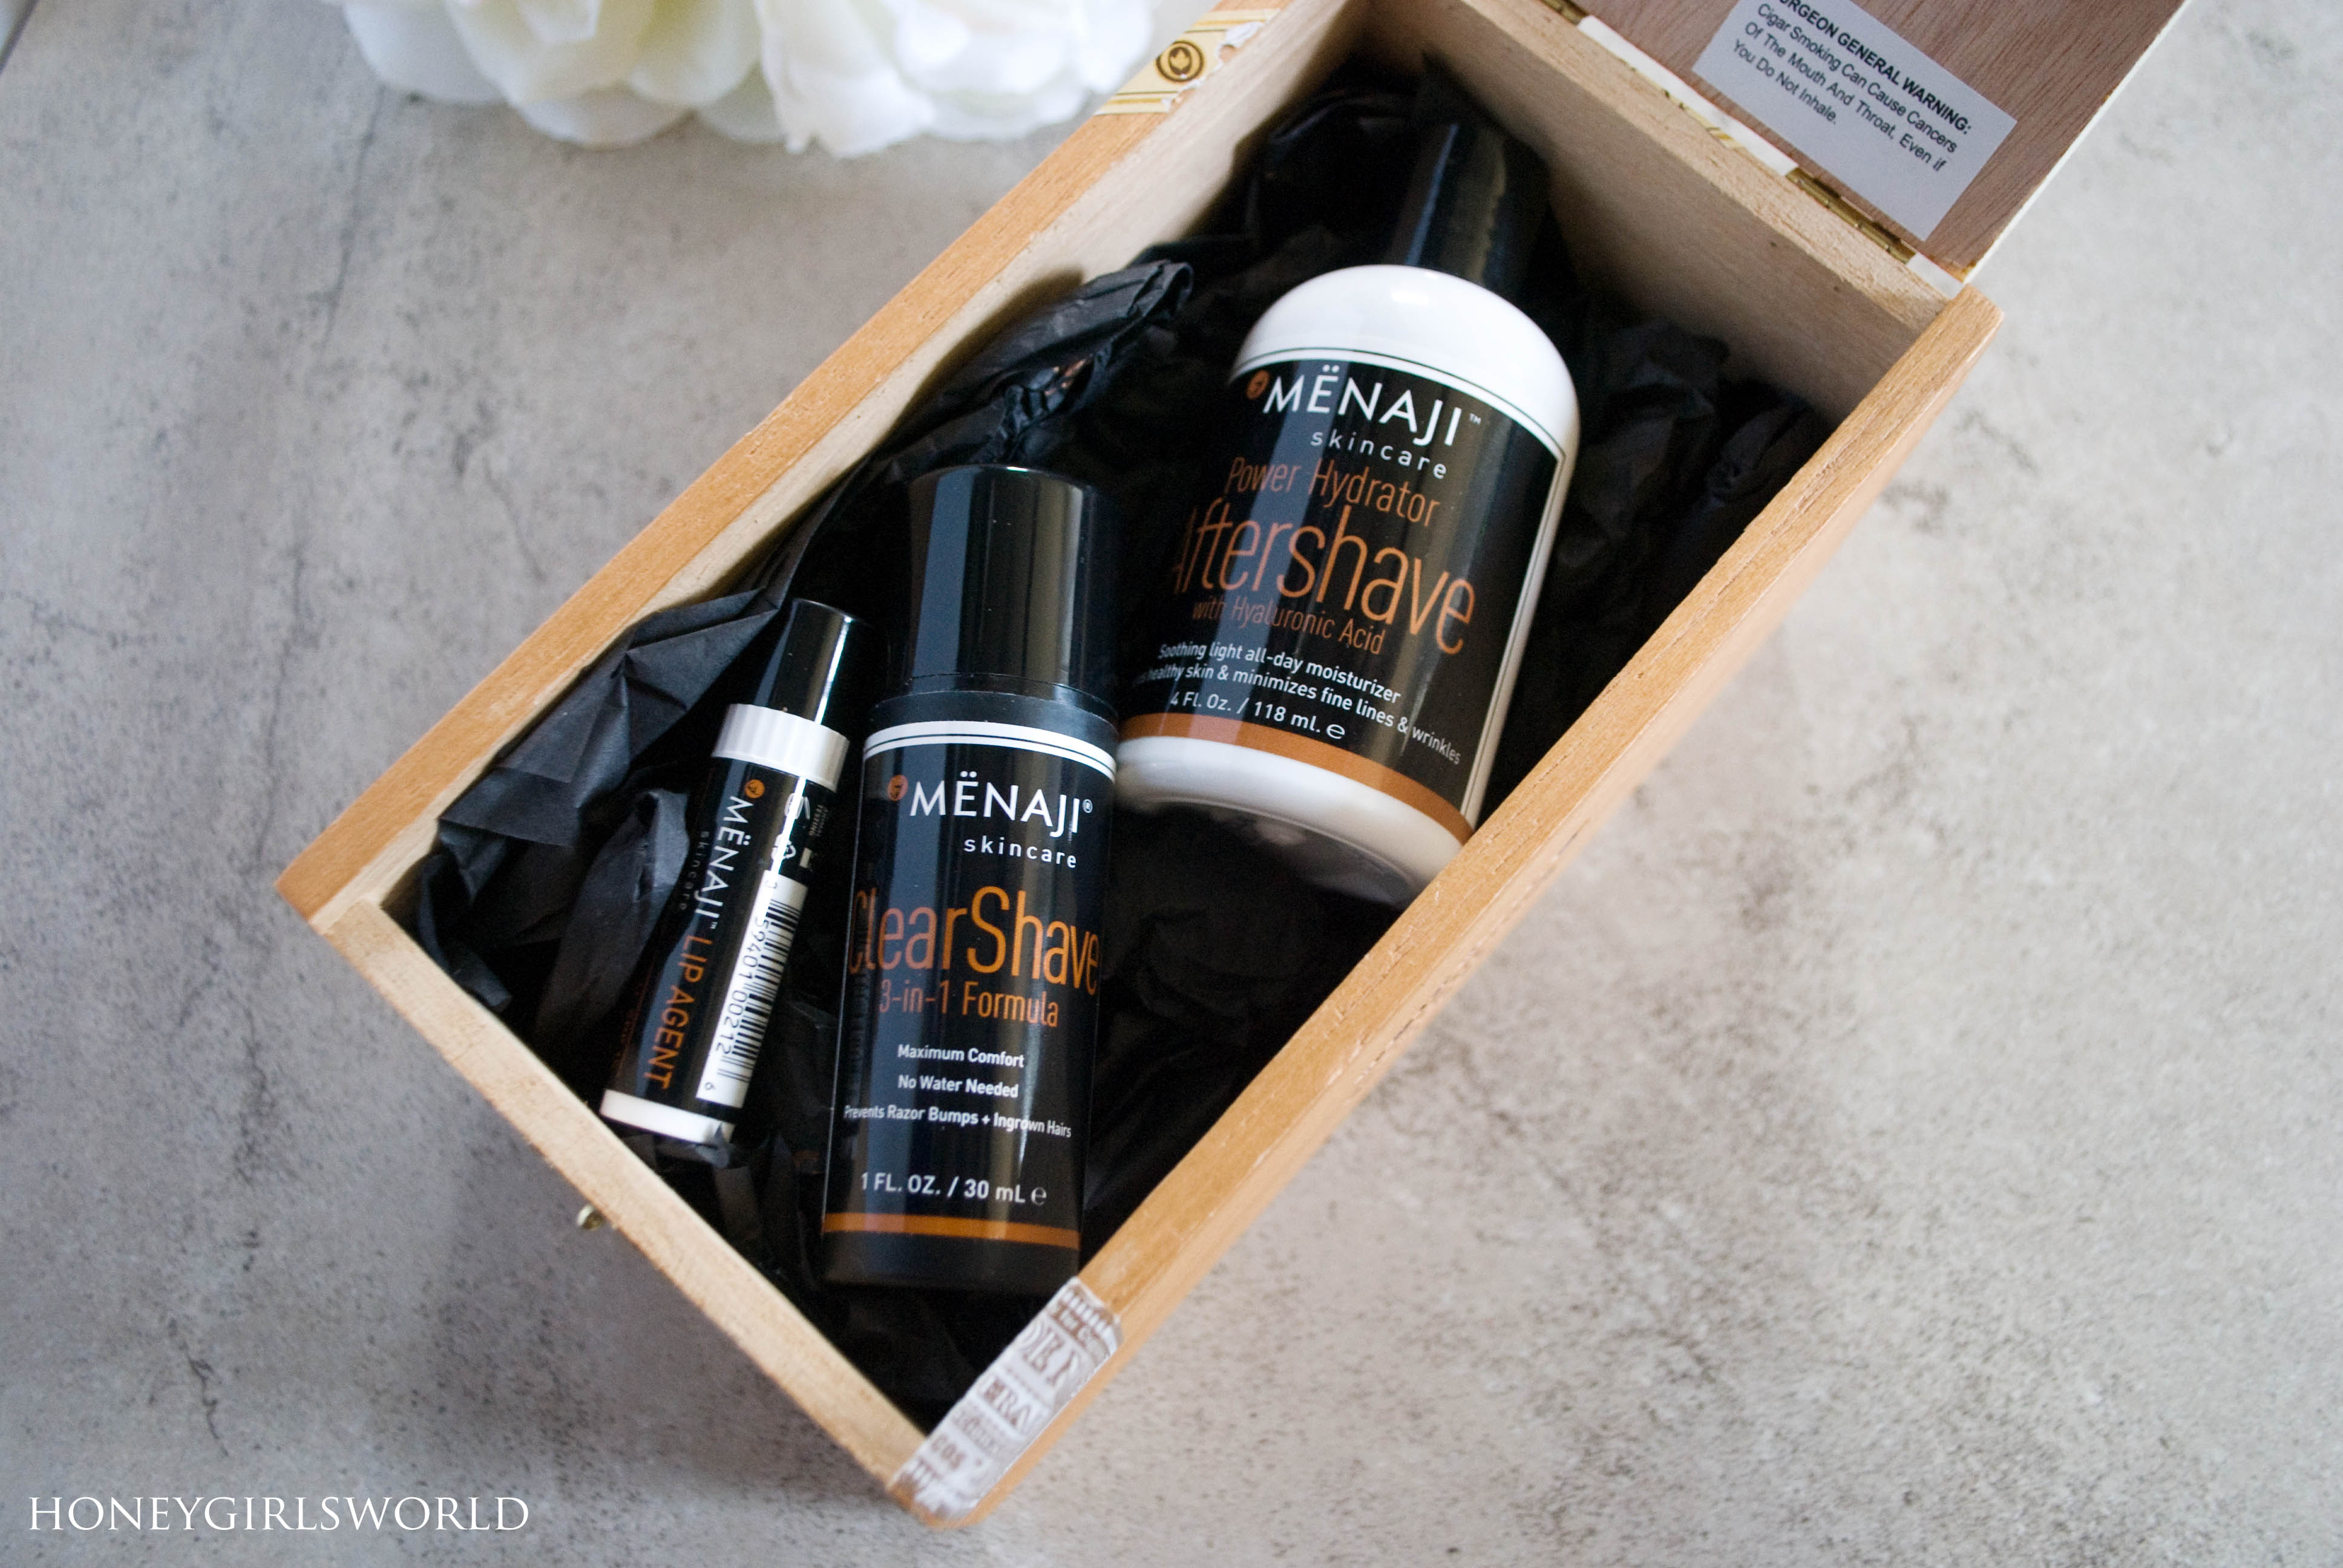 Super Products For Your Super Hero Dad - Father's Day Gift Set from Menaji Skin Care http://honeygirlsworld.com